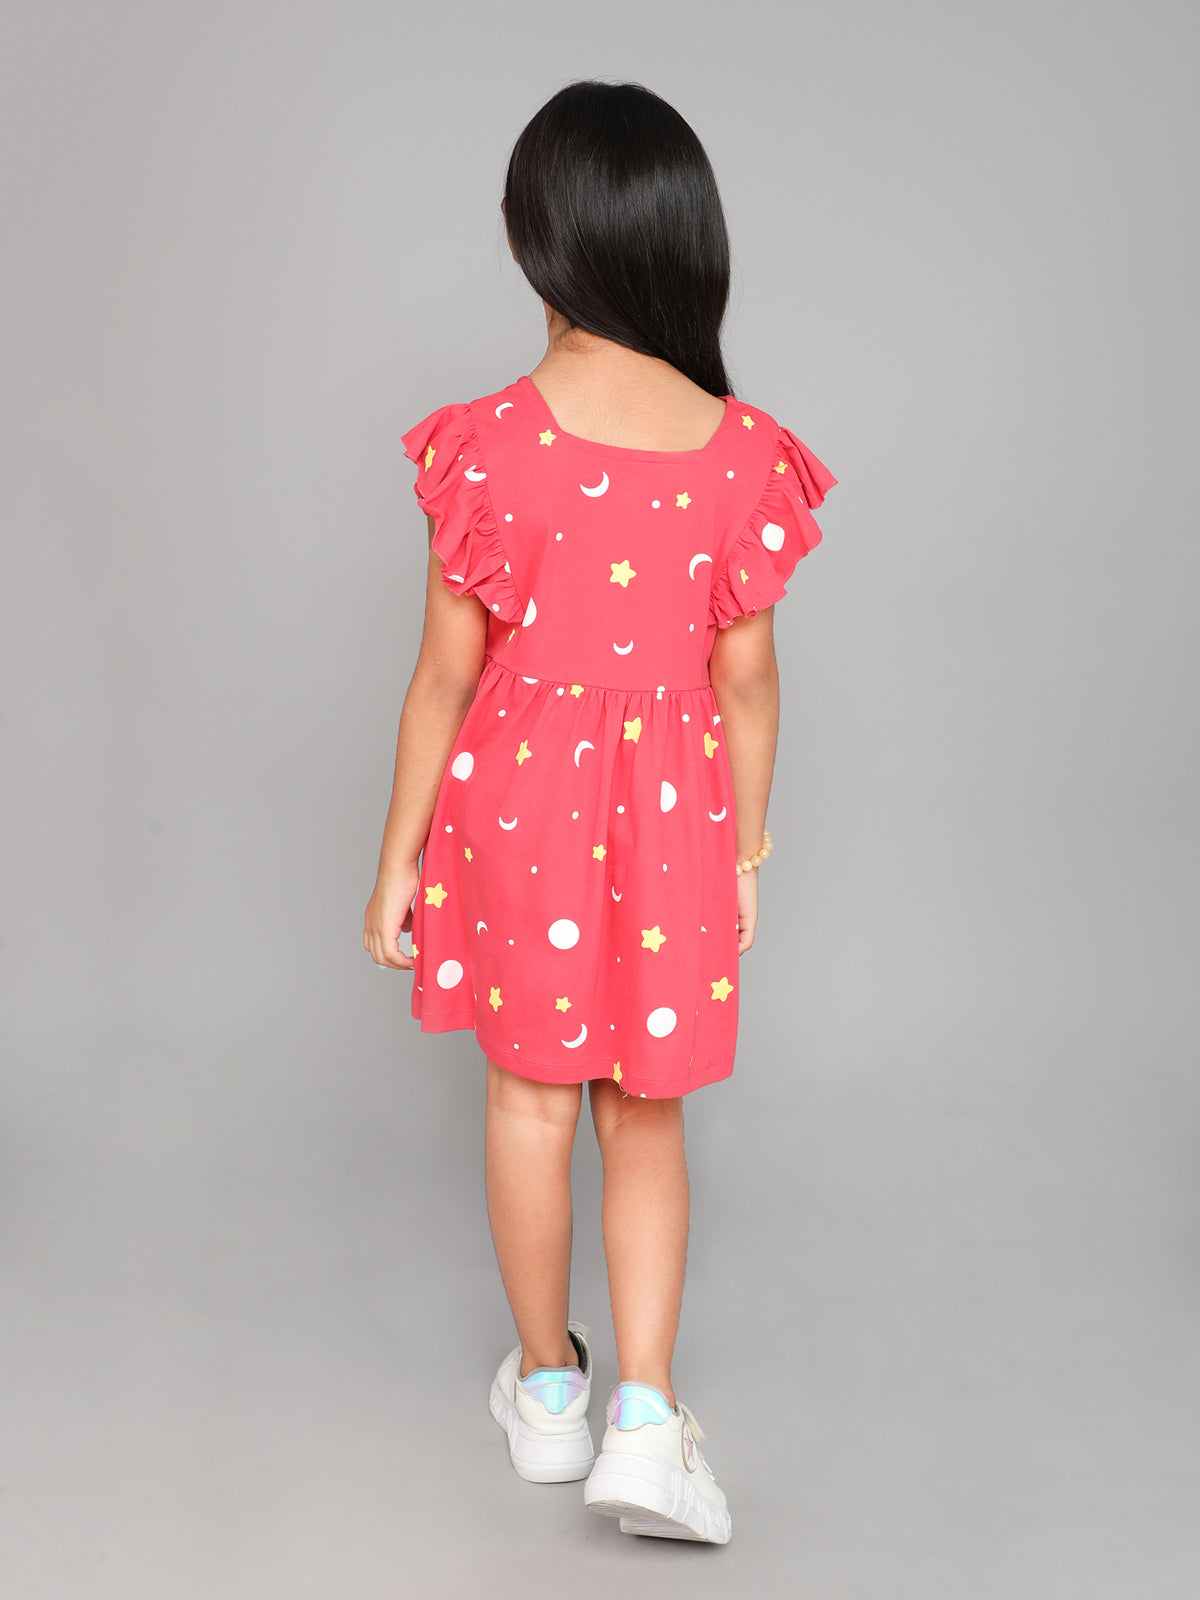 Printed A-Line dress for girls